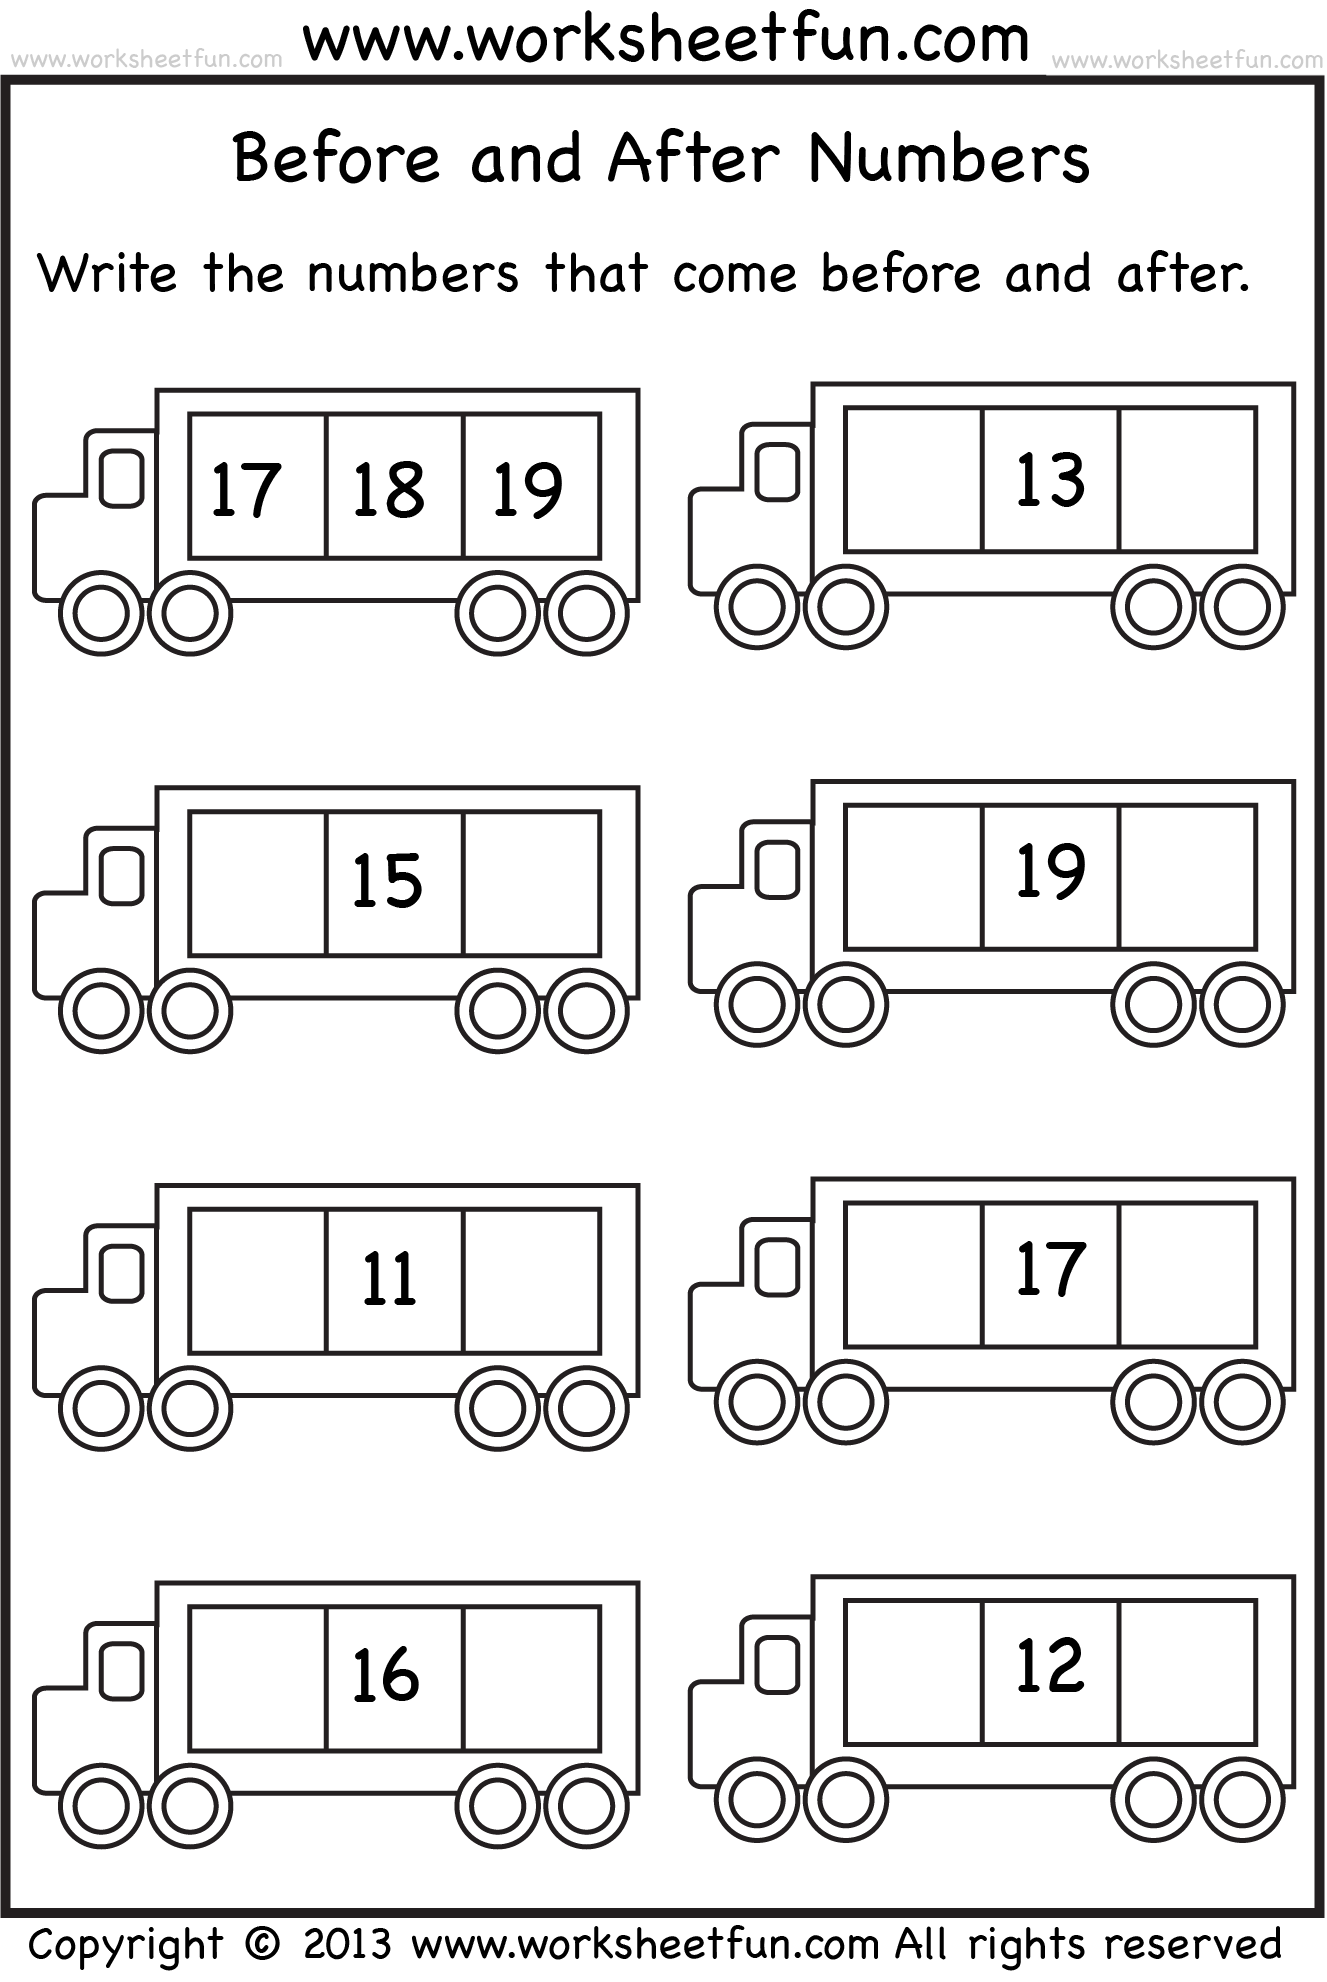 before-and-after-numbers-worksheets